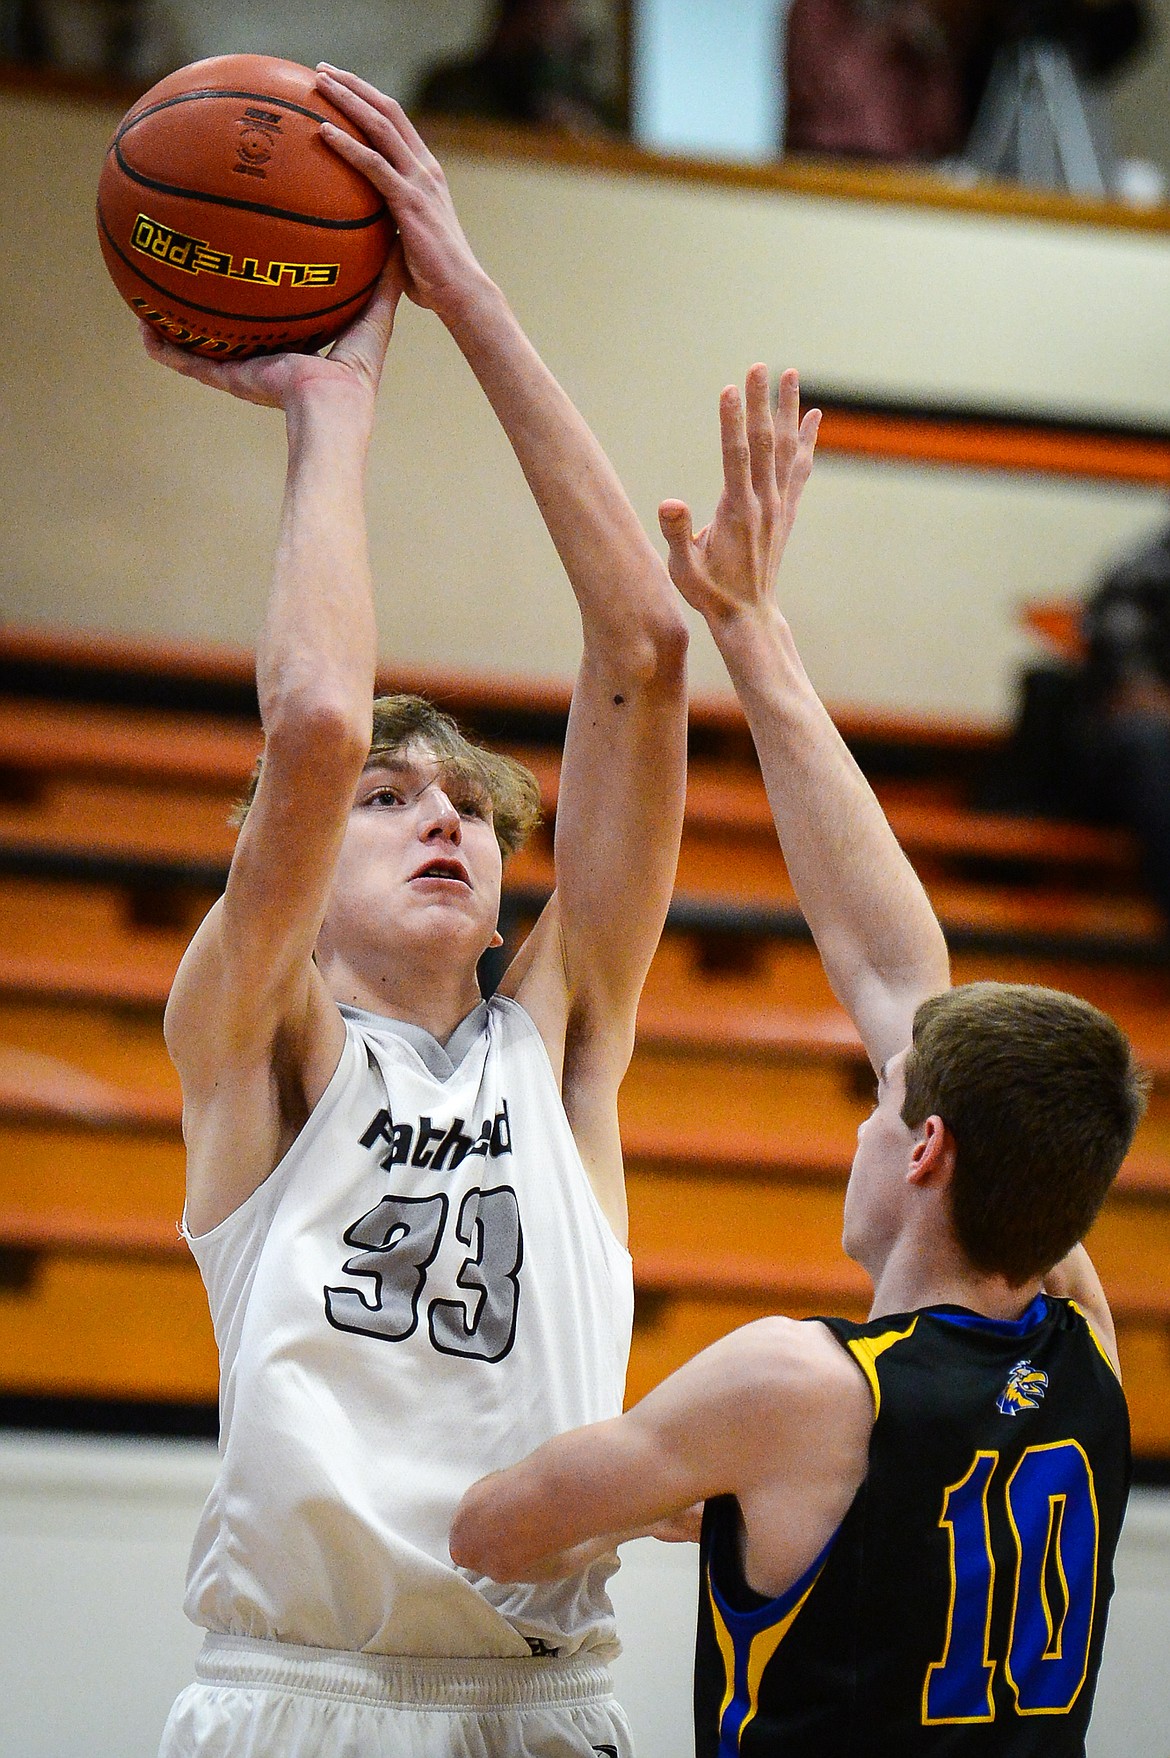 Flathead's Ezra Epperly (33) squares up to shoot in the first quarter against Missoula Big Sky at Flathead High School on Saturday. (Casey Kreider/Daily Inter Lake)